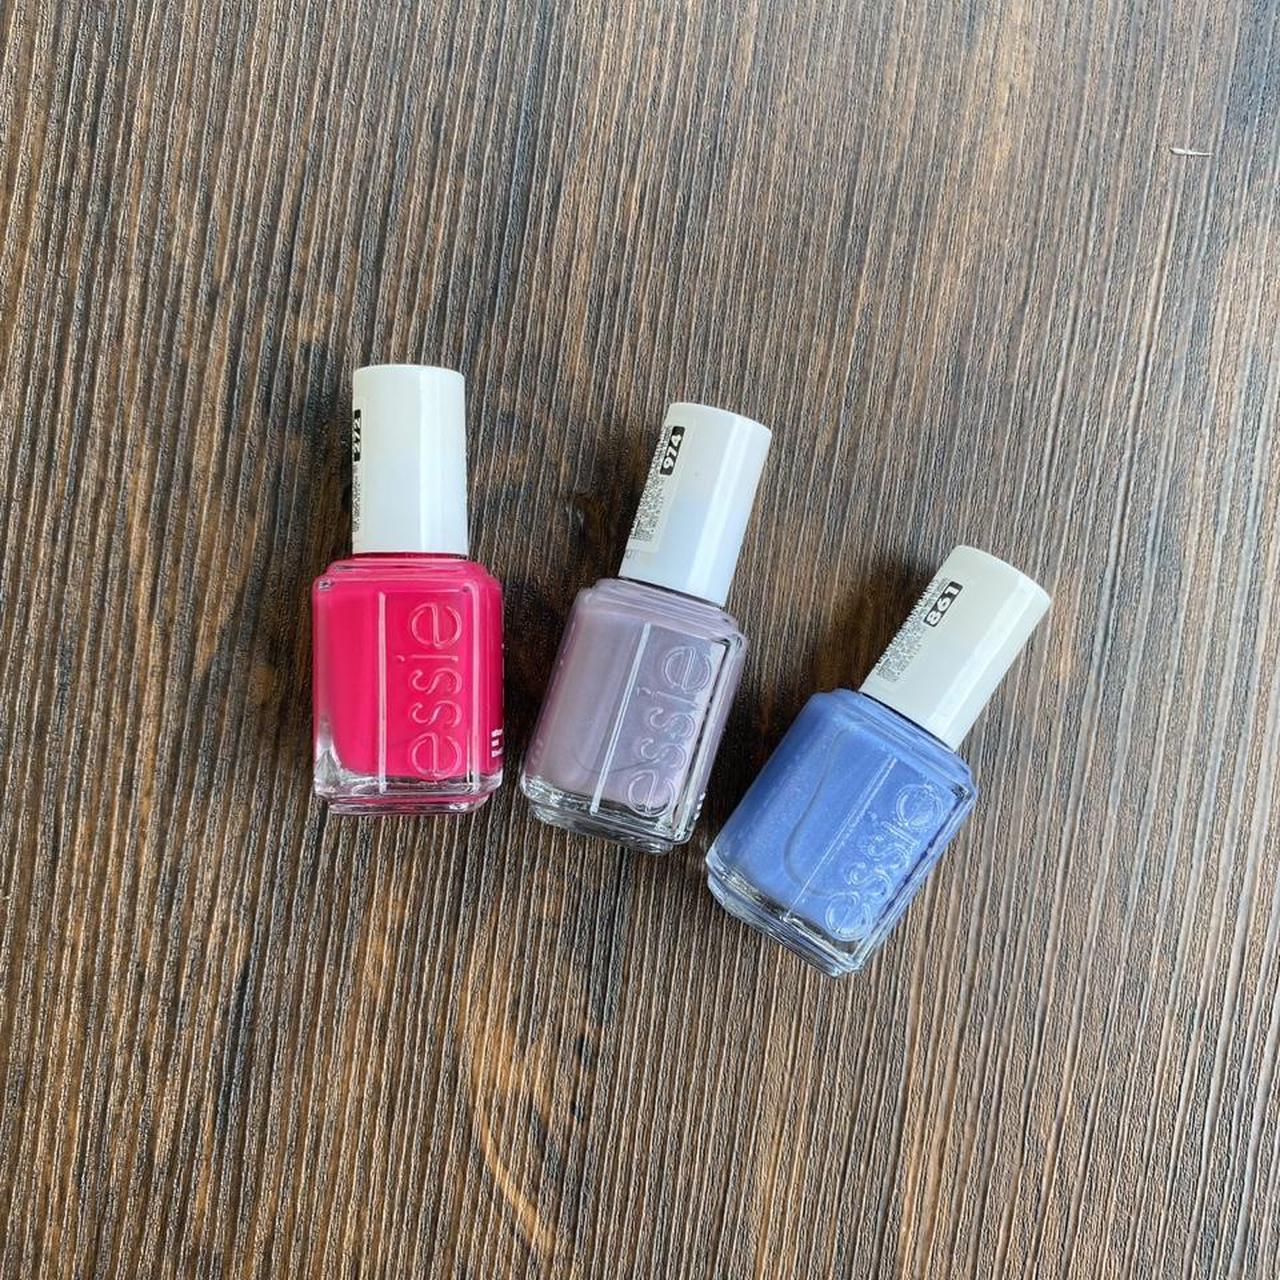 Product Image 1 - 3 essie nail polishes! these